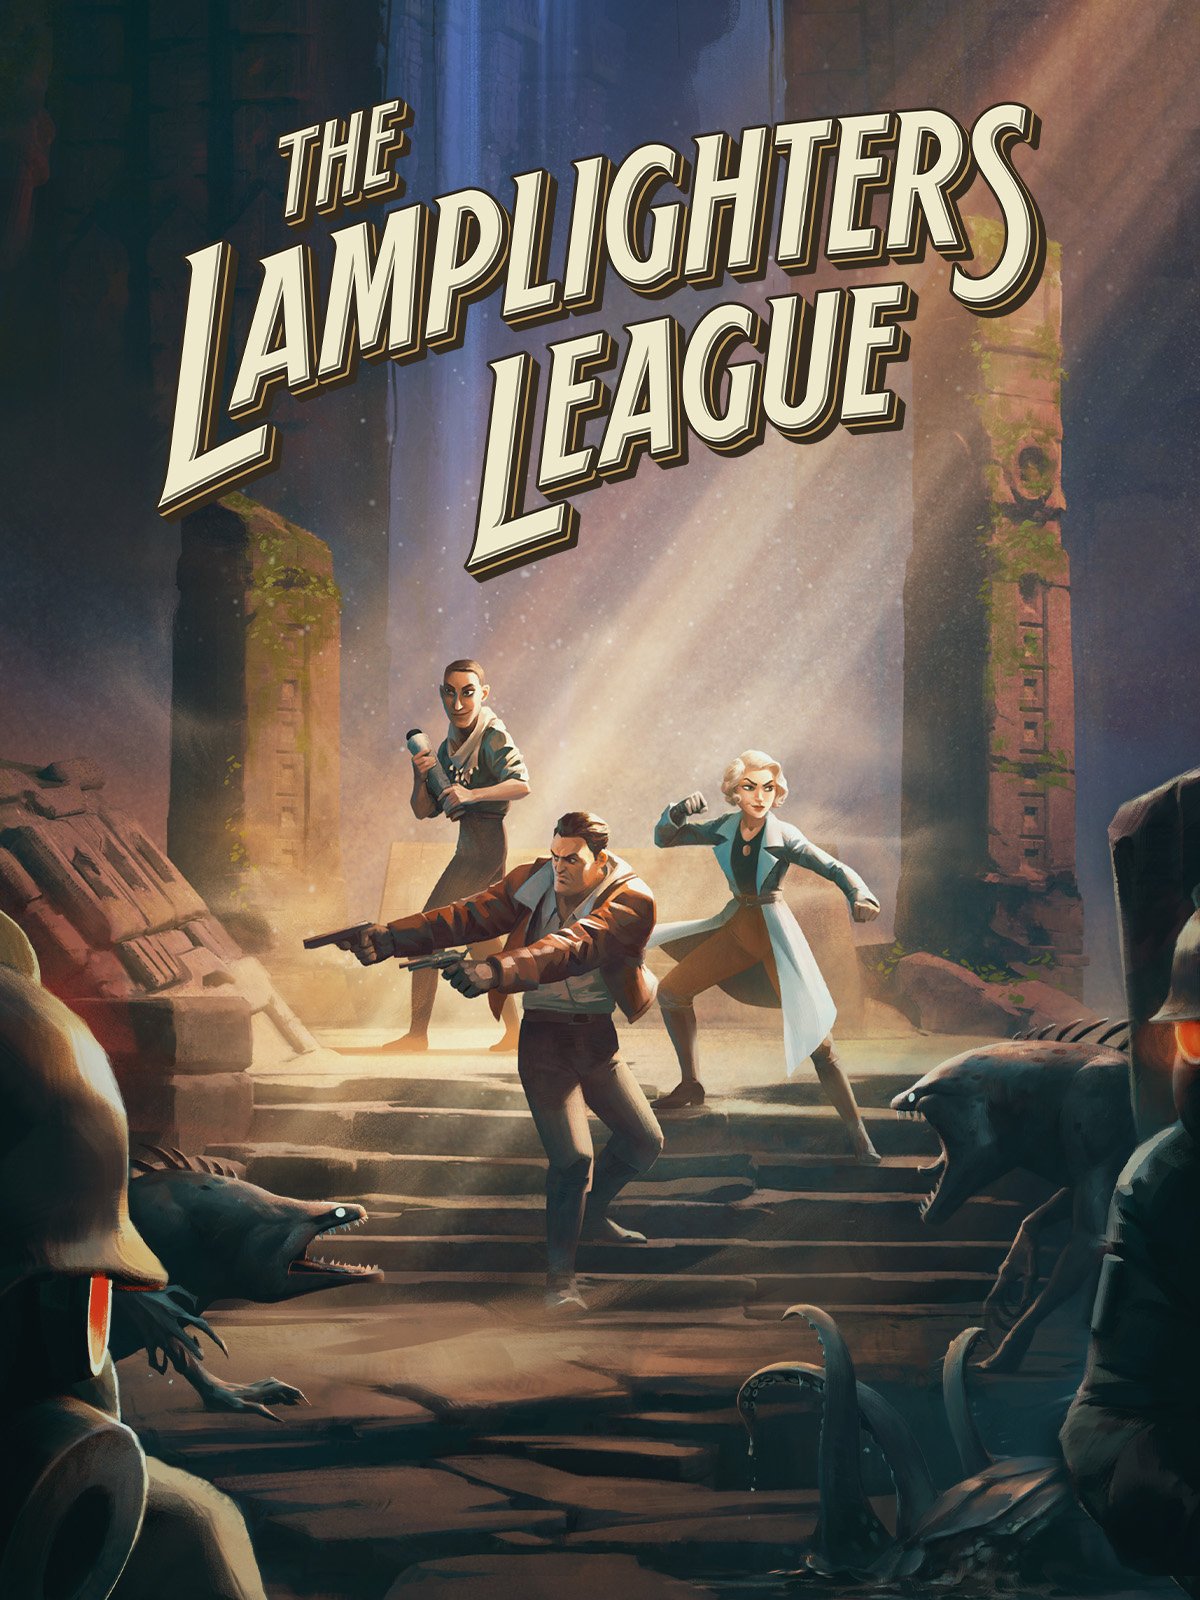 for windows download The Lamplighters League